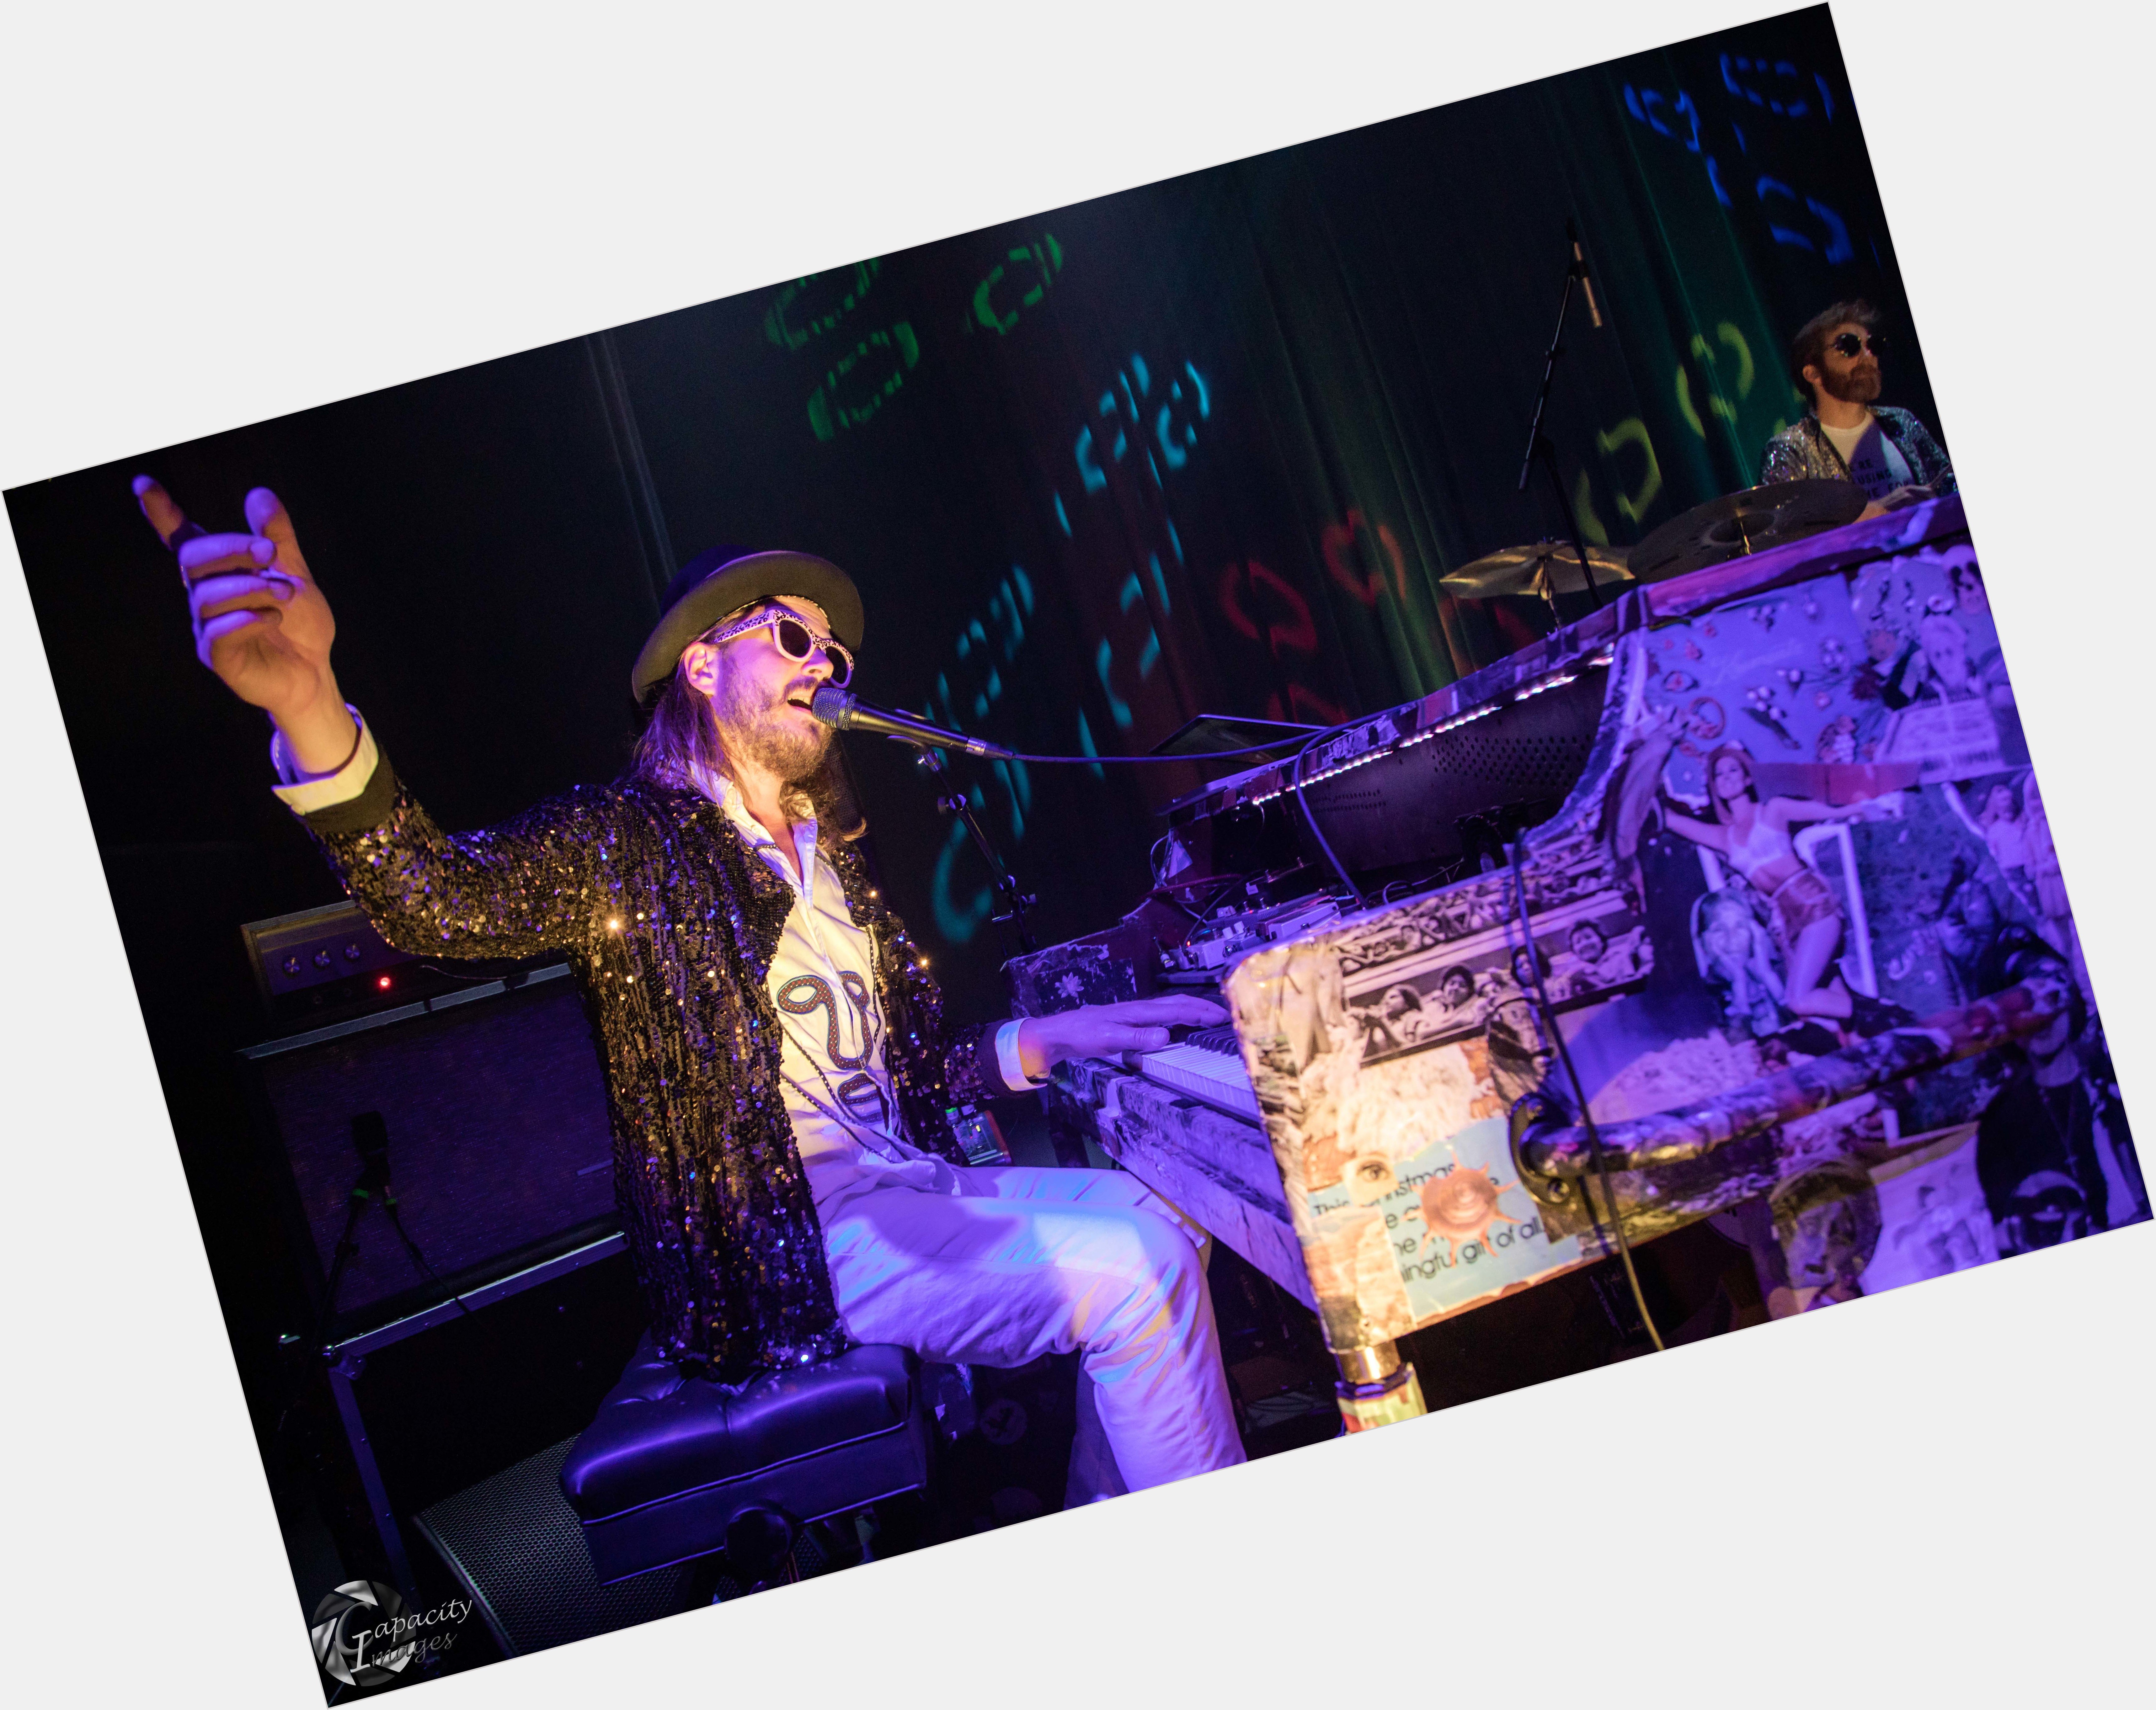 Marco Benevento dating 2